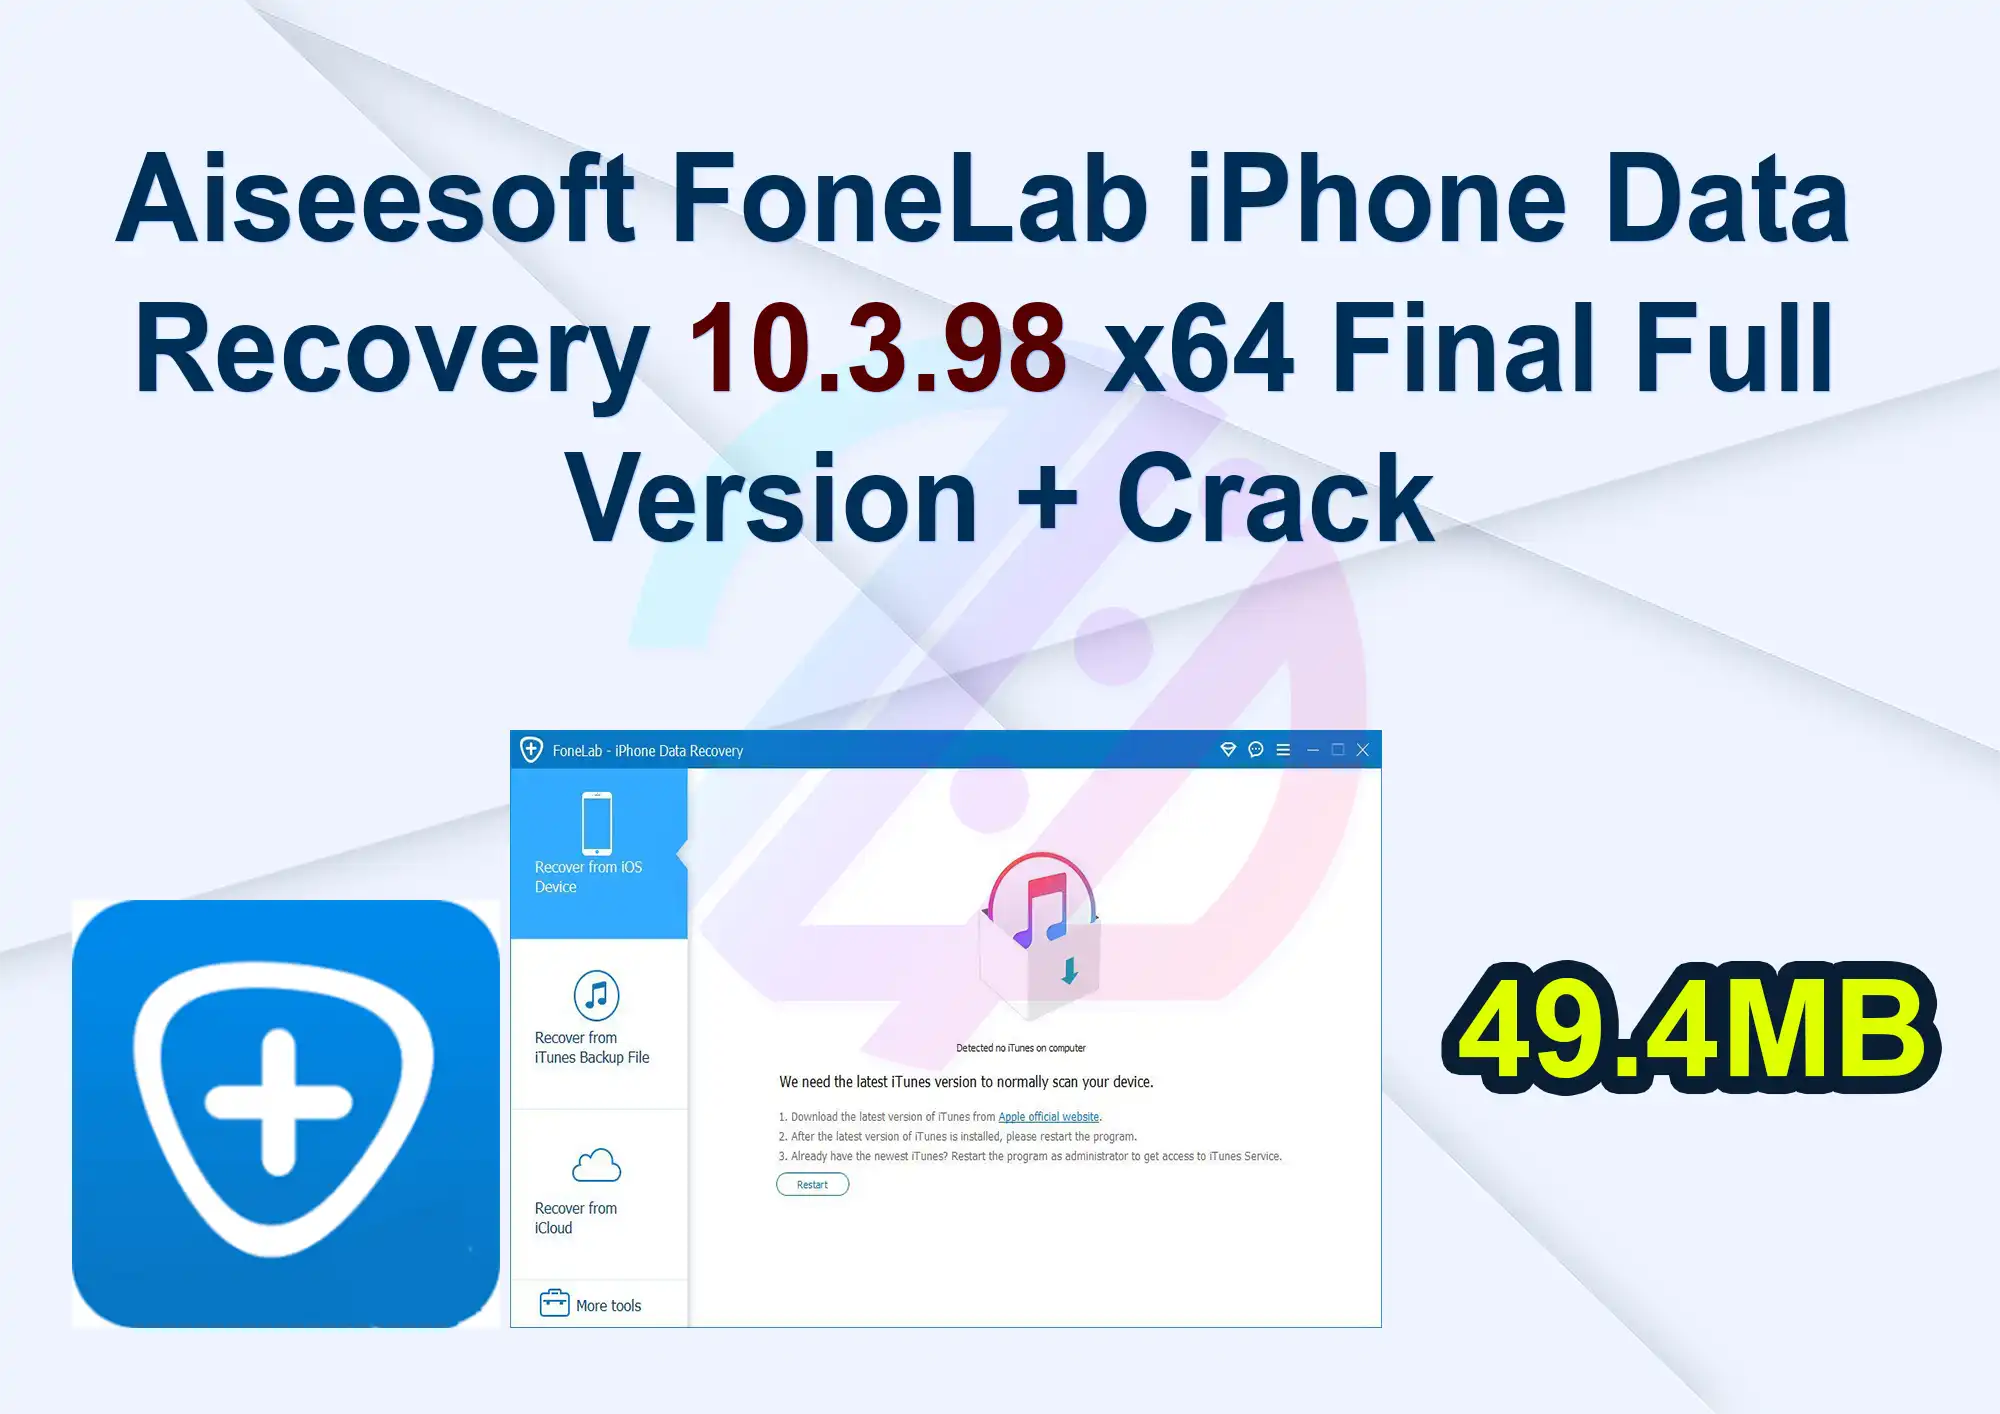 Aiseesoft FoneLab iPhone Data Recovery 10.3.98 x64 Final Full Version + Crack